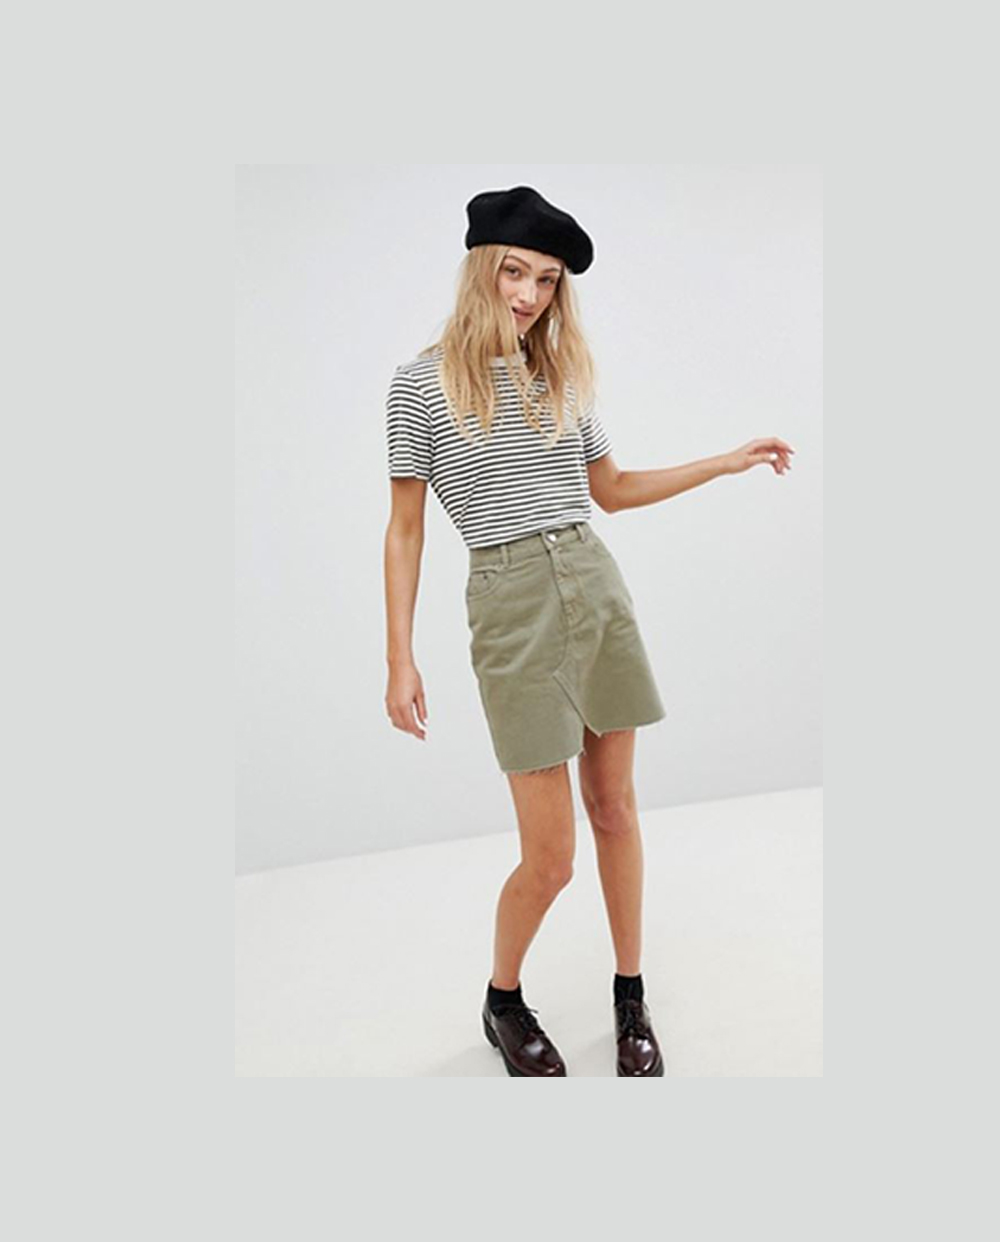 30+ Items We Can't Believe Are On Sale Right Now And We're #AddingToCart | Denim Pelmet Skirt in Khaki, $44.06 (was $55.07) from Asos